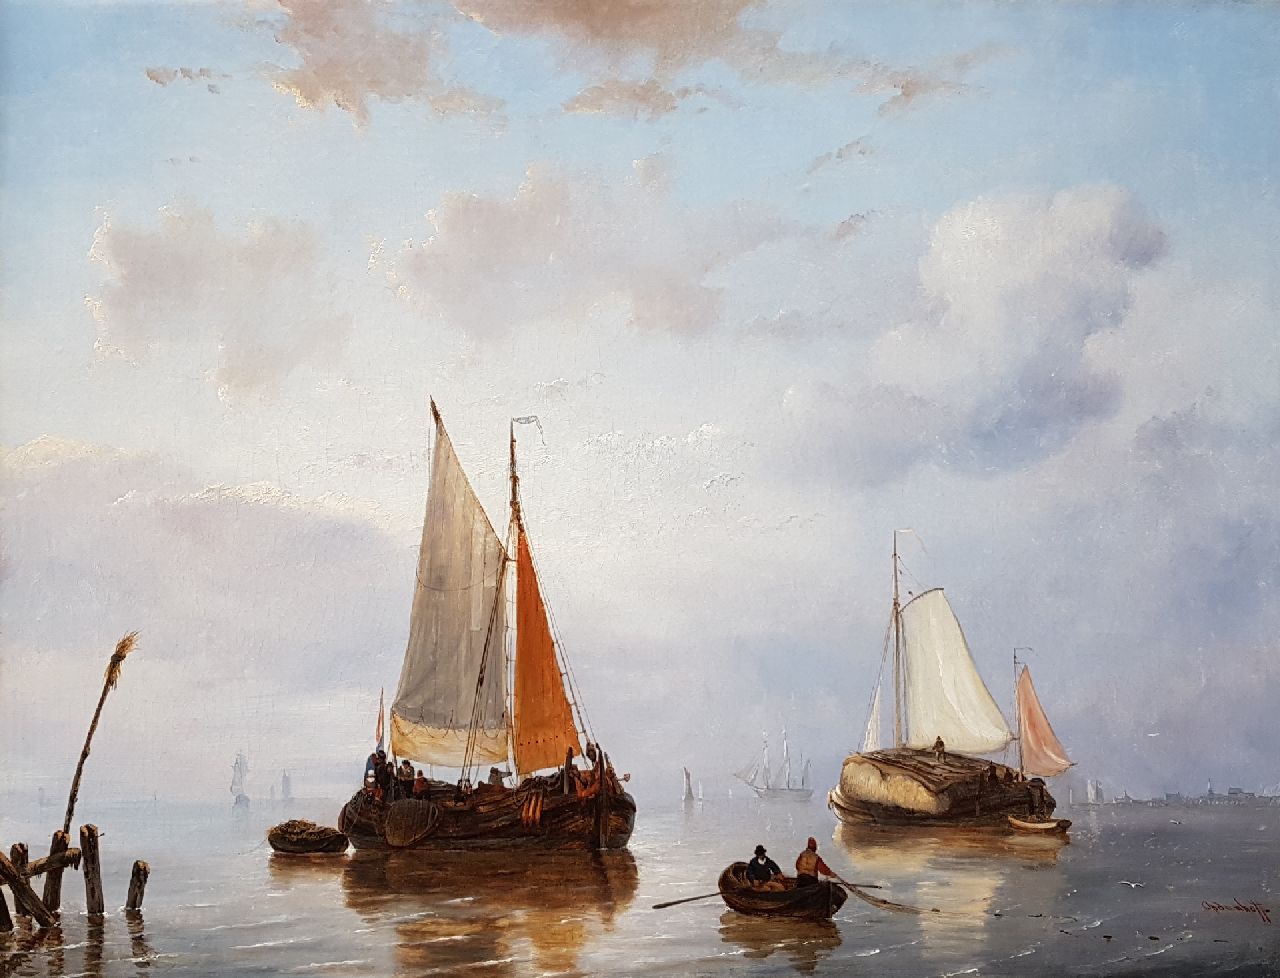 Opdenhoff G.W.  | Witzel 'George Willem' Opdenhoff | Paintings offered for sale | Shipping in a calm, oil on canvas 60.2 x 79.3 cm, signed l.r.